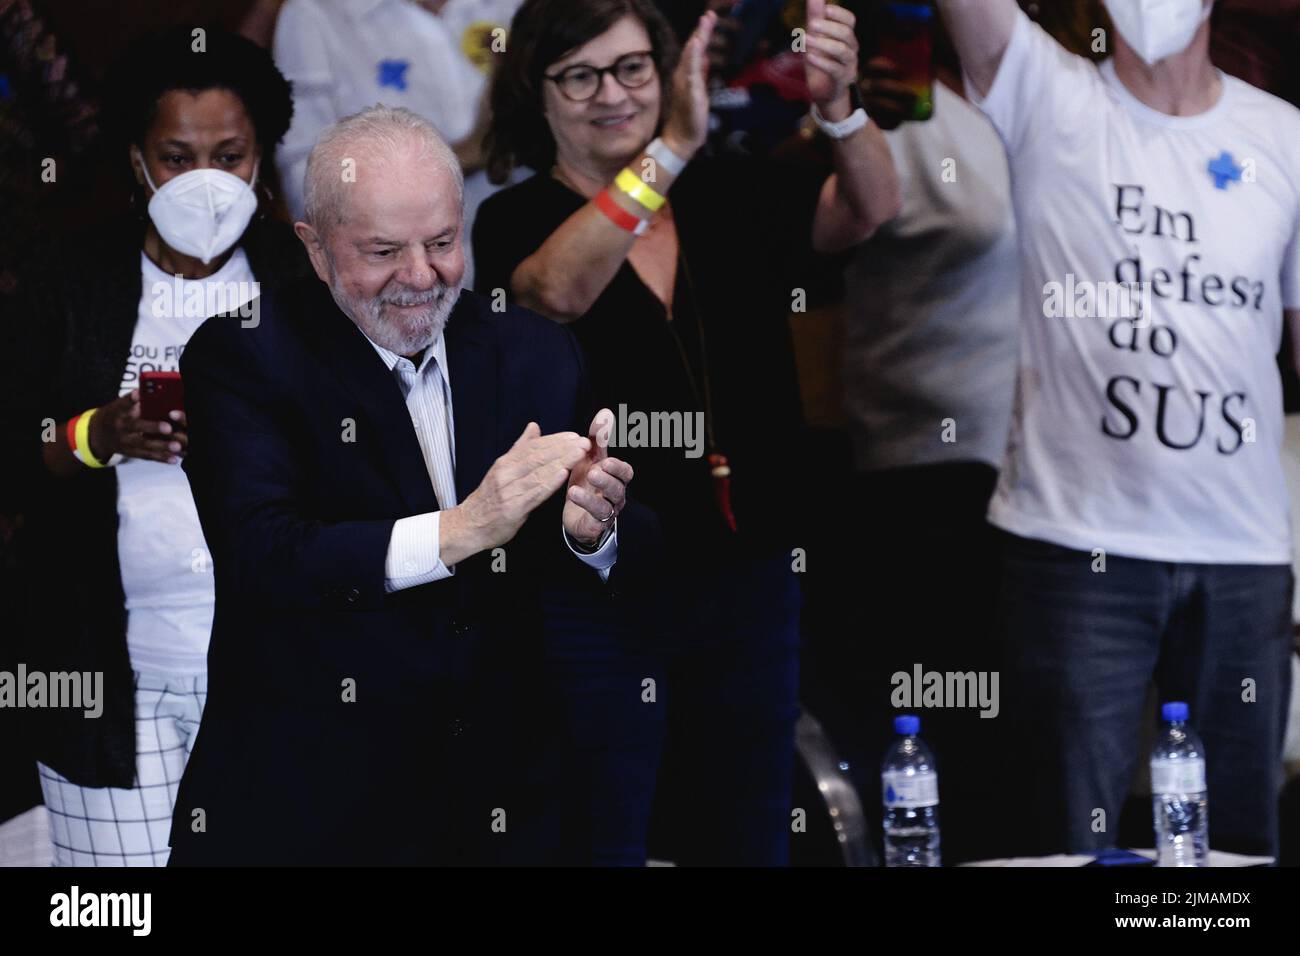 Sao Paulo, Brazil. 05th Aug, 2022. SP - Sao Paulo - 08/05/2022 - SAO PAULO, FREE, DEMOCRATIC AND POPULAR HEALTH CONFERENCE - former president and current presidential candidate Luis Inacio Lula da Silva (PT) during the Free, Democratic and Popular Conference de Saude 2022, which takes place at Casa de Portugal, in the central region of the city of Sao Paulo, this Friday (05). The conference held by Frente Pela Vida has as its theme the defense of the Unified Health System (SUS). Photo: Ettore Chiereguini/AGIF/Sipa USA Credit: Sipa USA/Alamy Live News Stock Photo